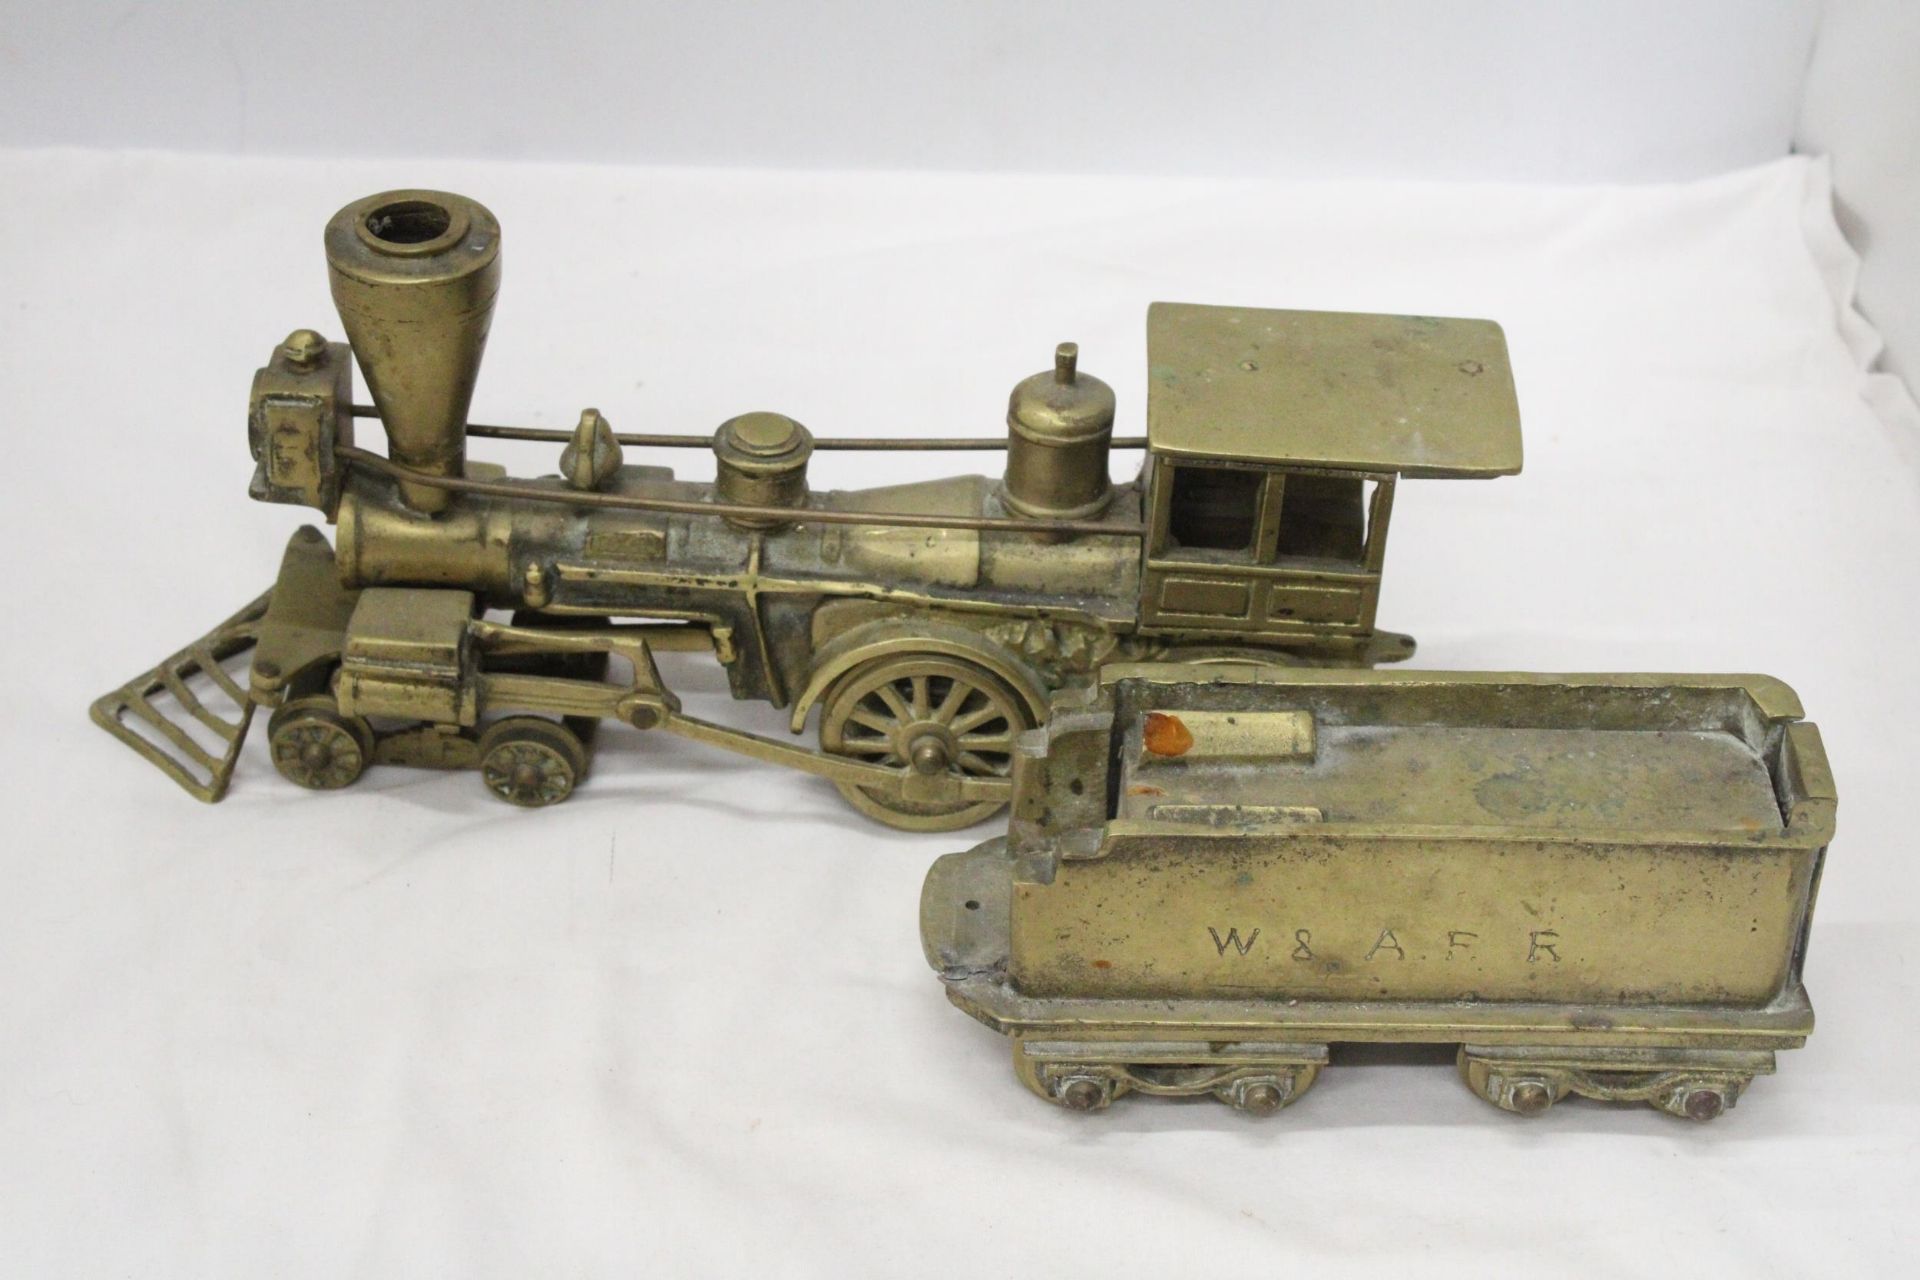 A W & AFR SOLID BRASS RAILROAD USA LOCO AND TENDER - WEIGHTS 6 KILO'S (53 cm)